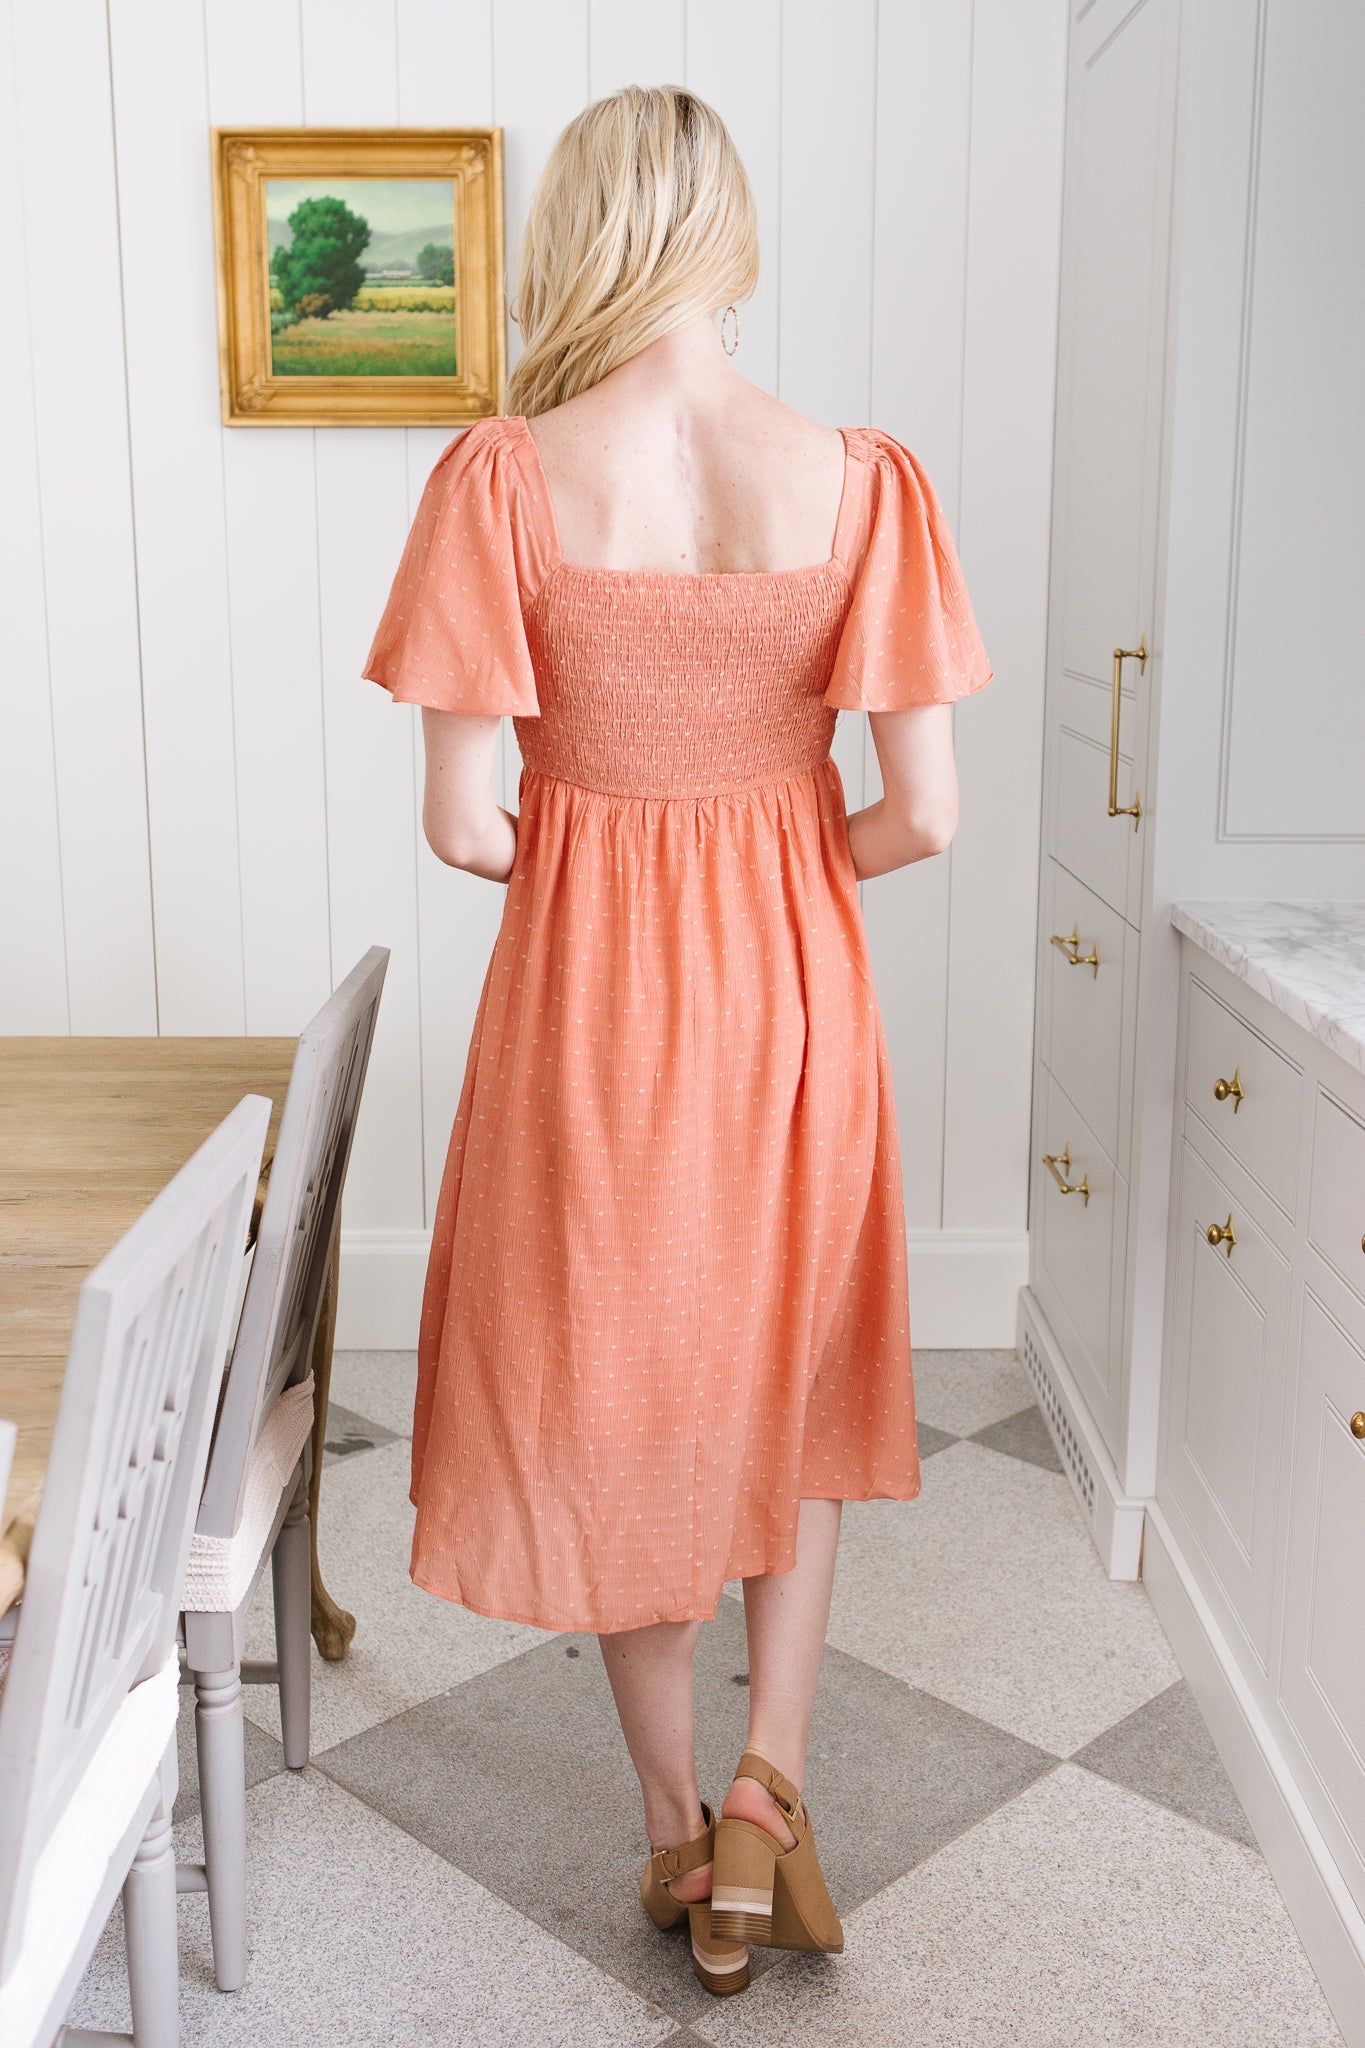 Enchanting Days Ahead Dress Womens Southern Soul Collectives 